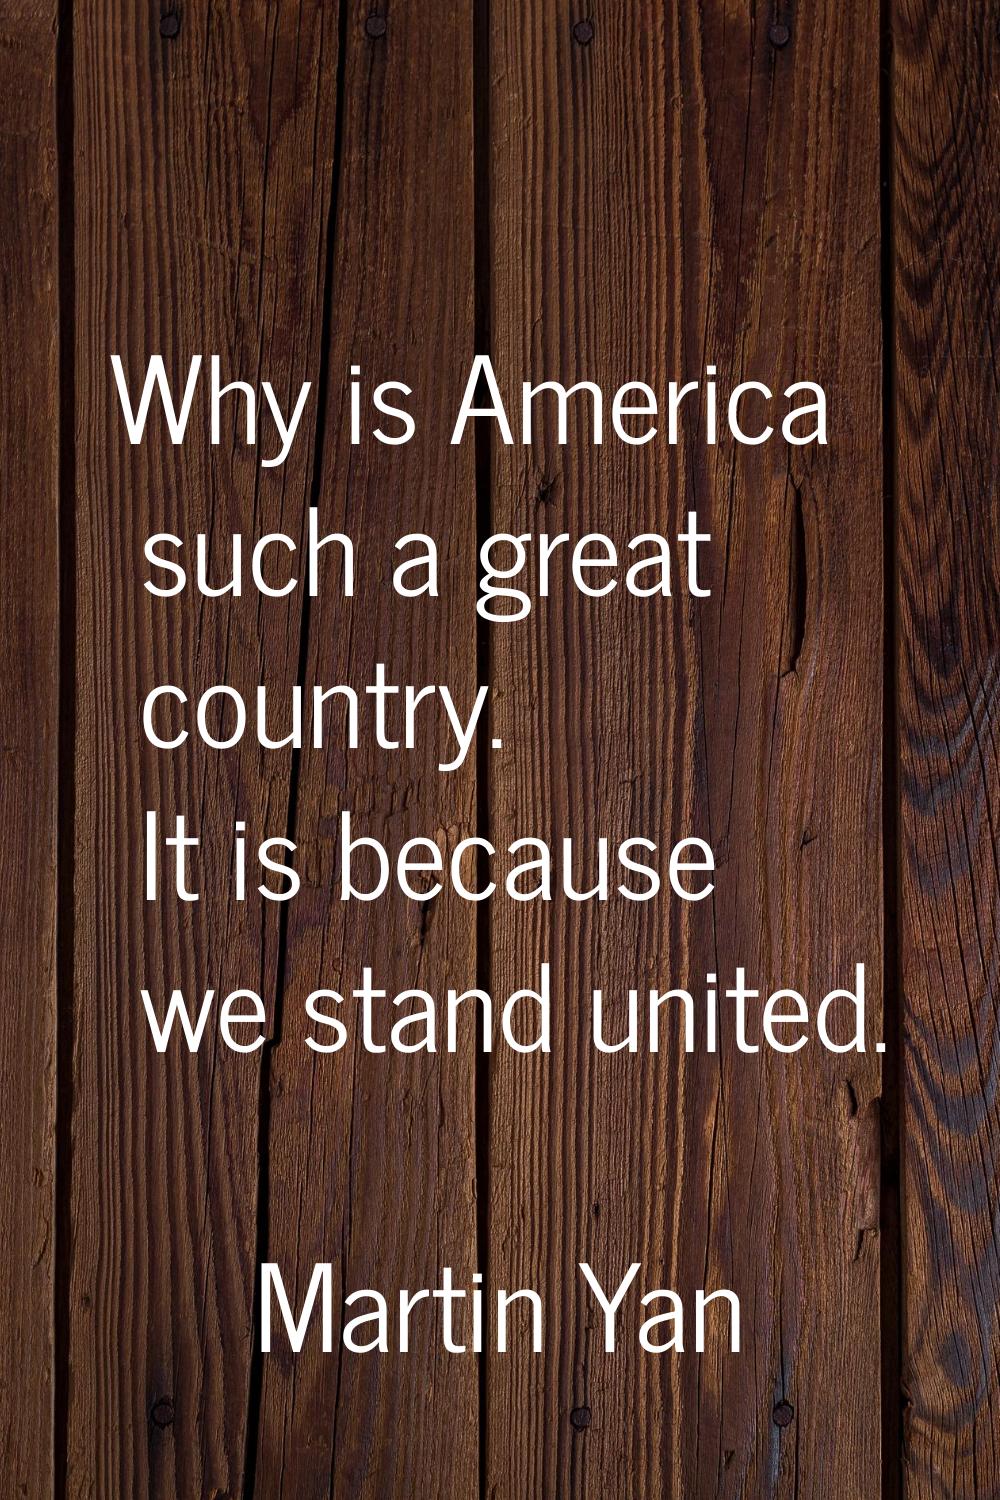 Why is America such a great country. It is because we stand united.